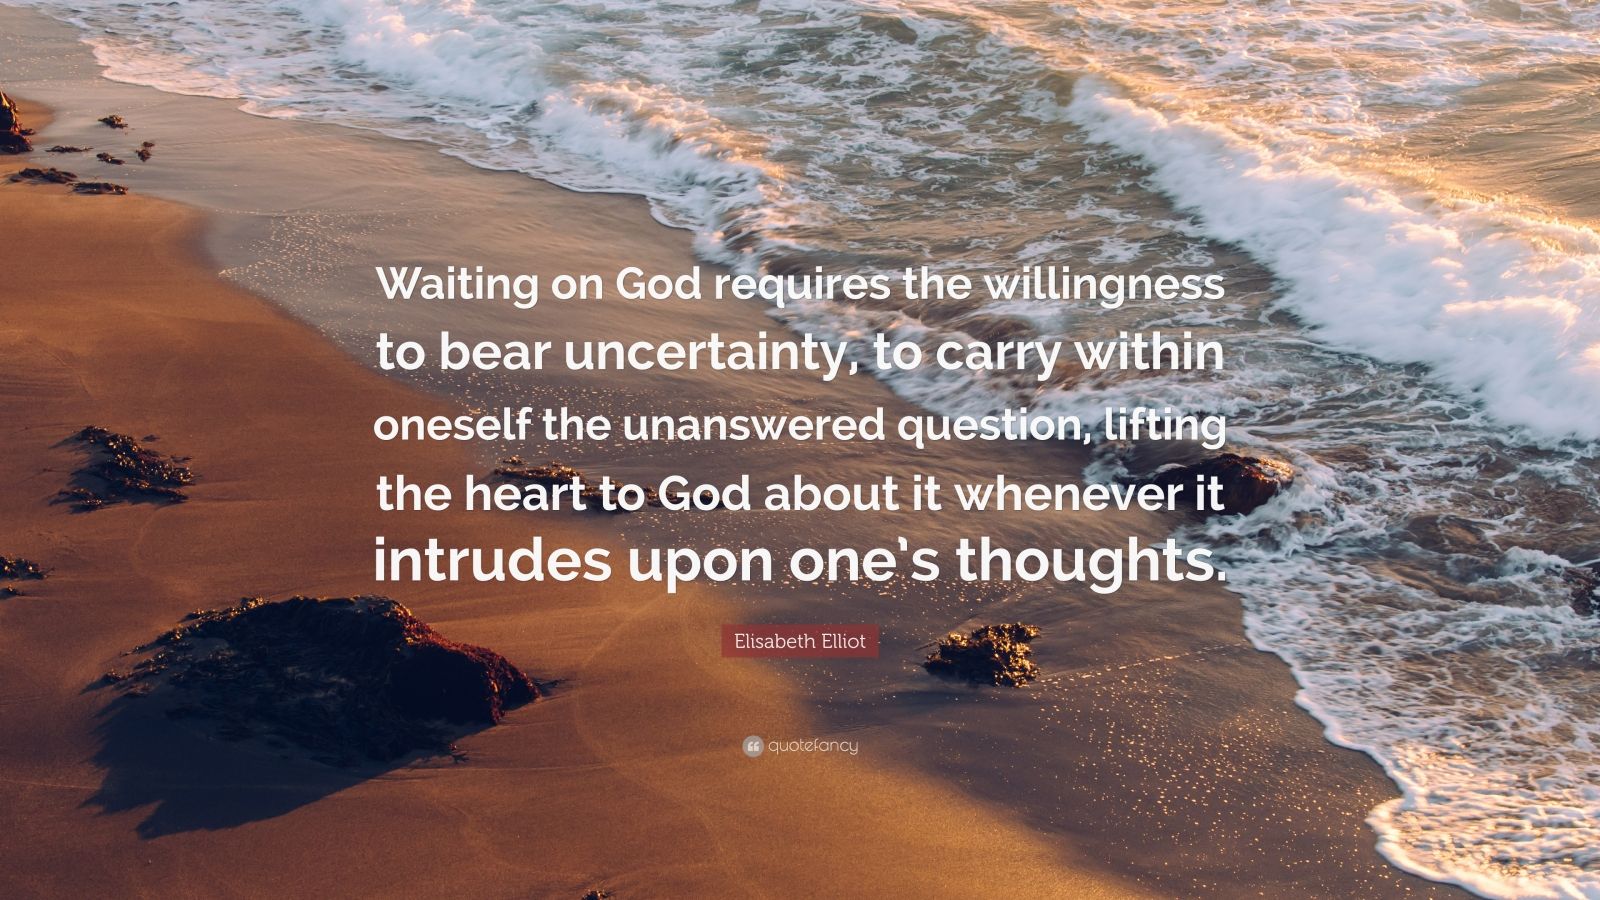 Elisabeth Elliot Quote: “Waiting on God requires the willingness to ...